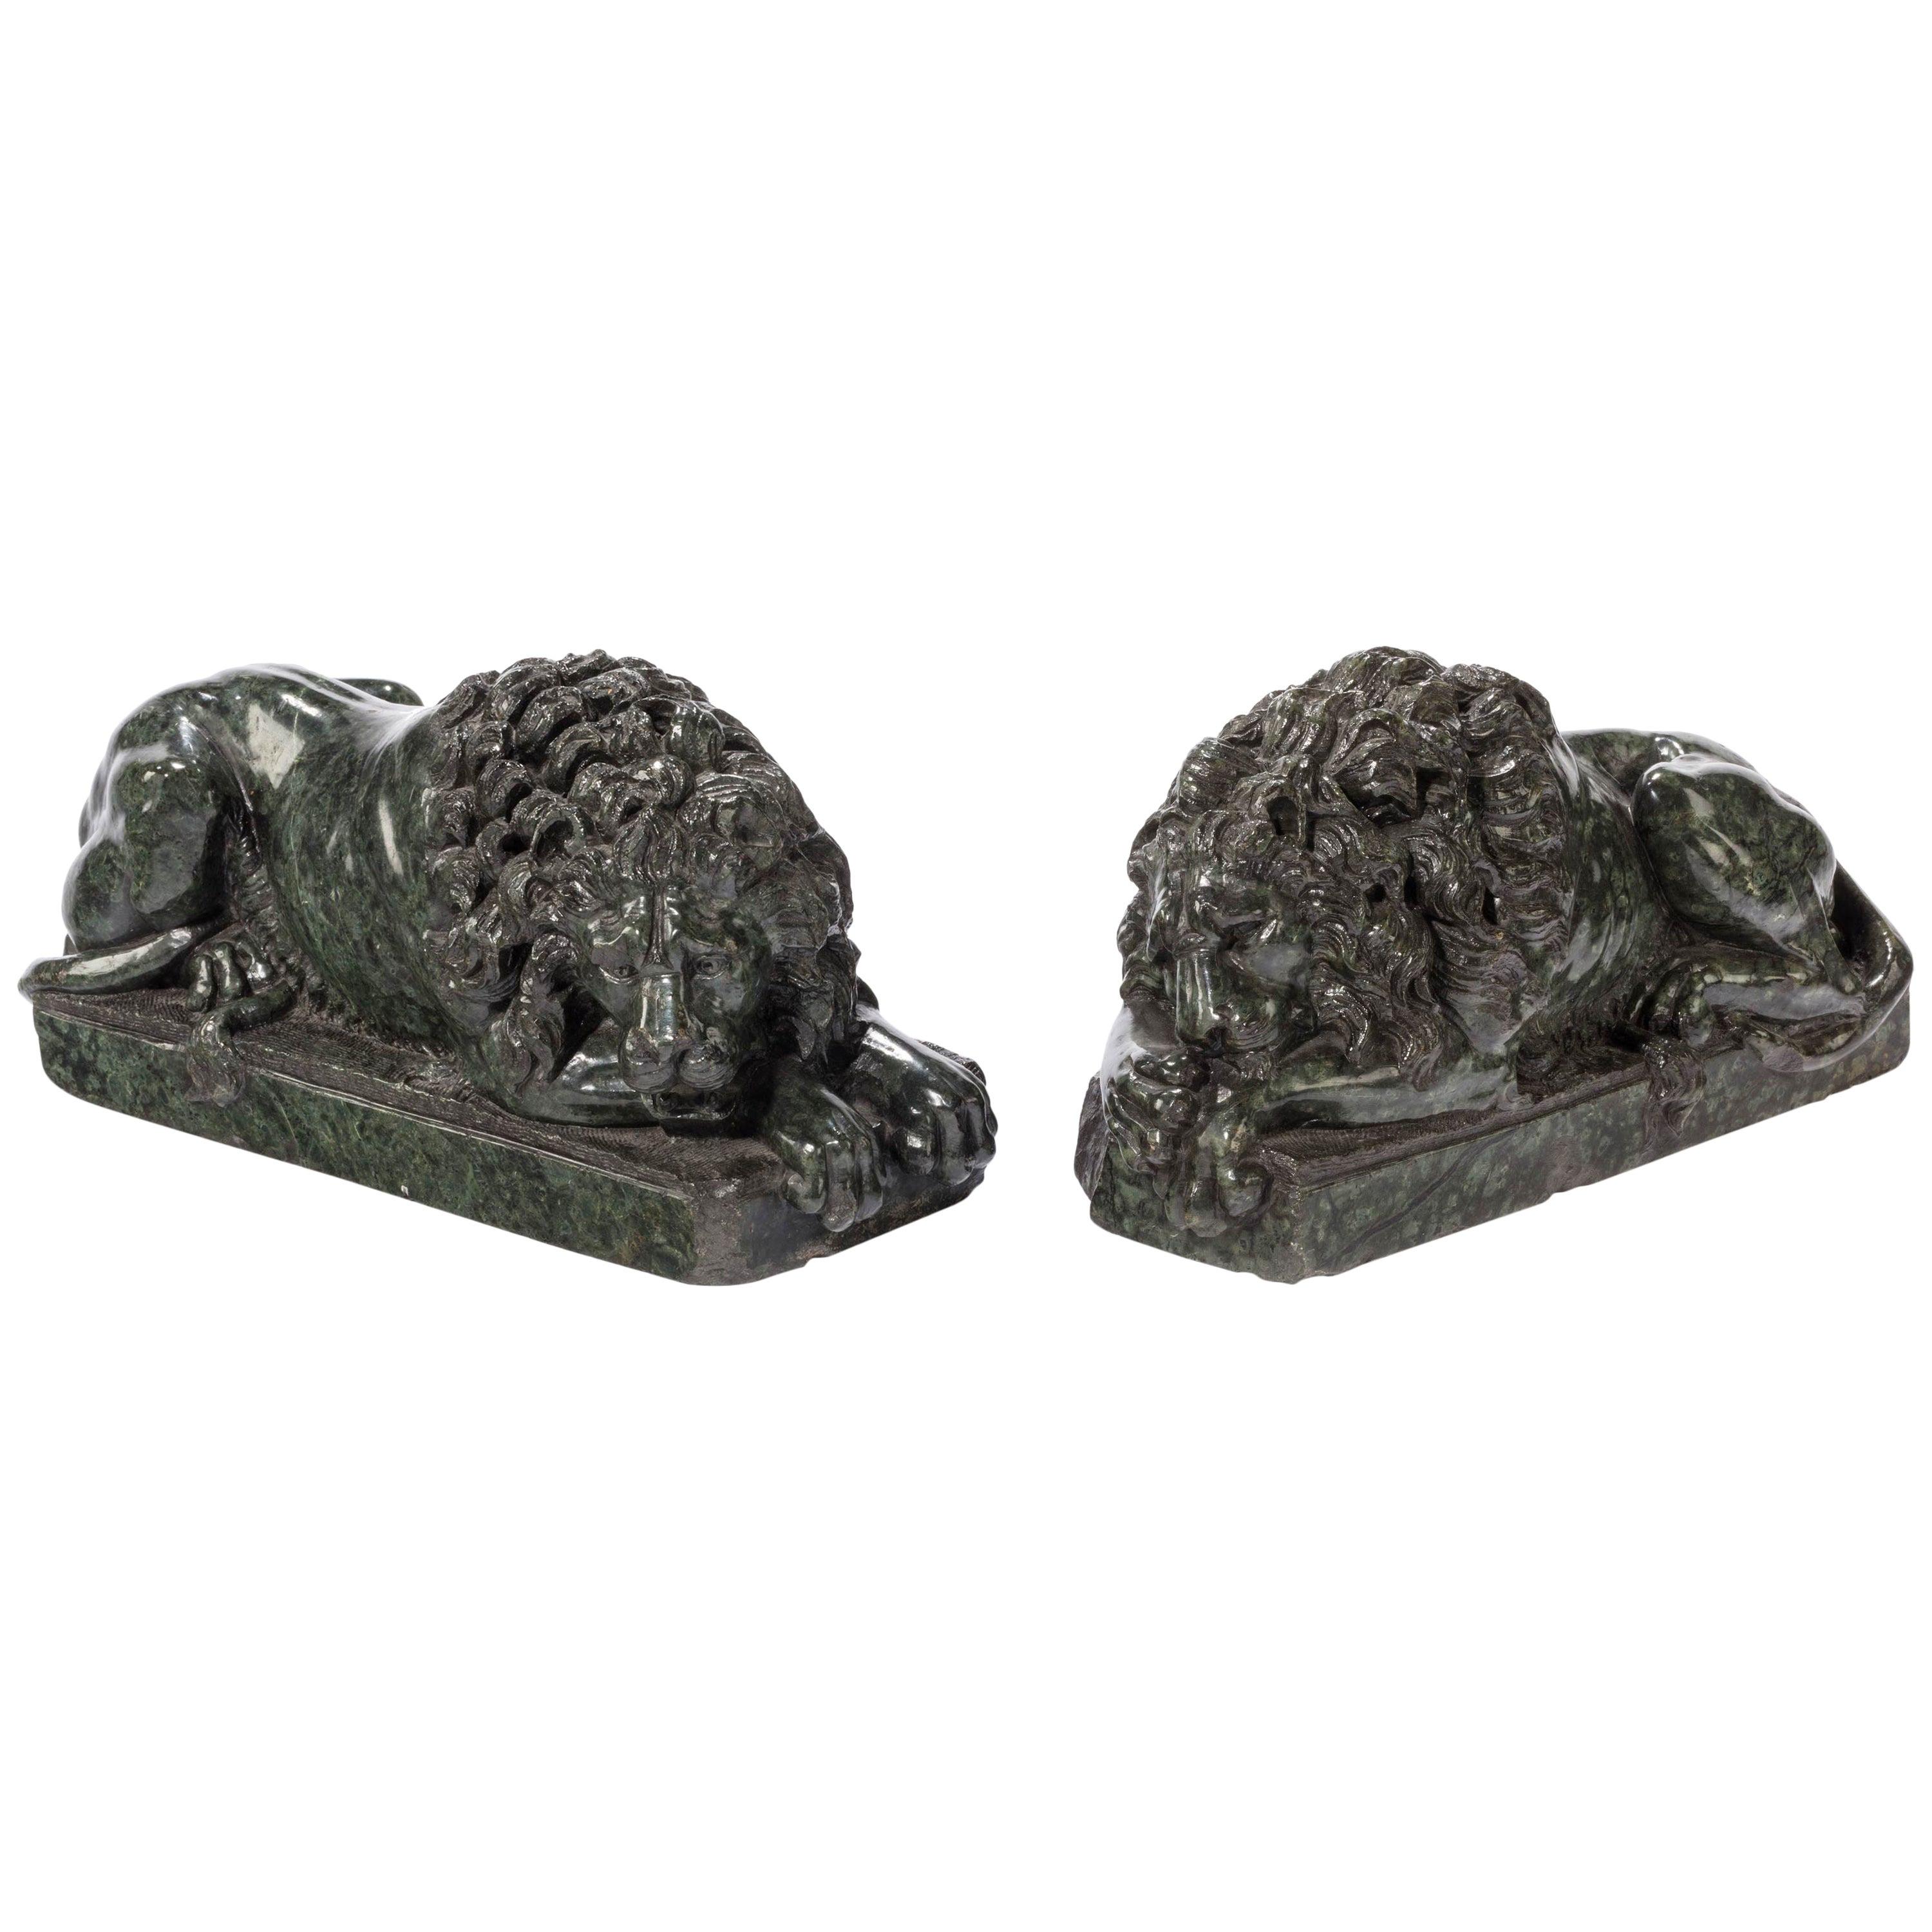 Pair of Late 19th Century Serpentine Desk Lions